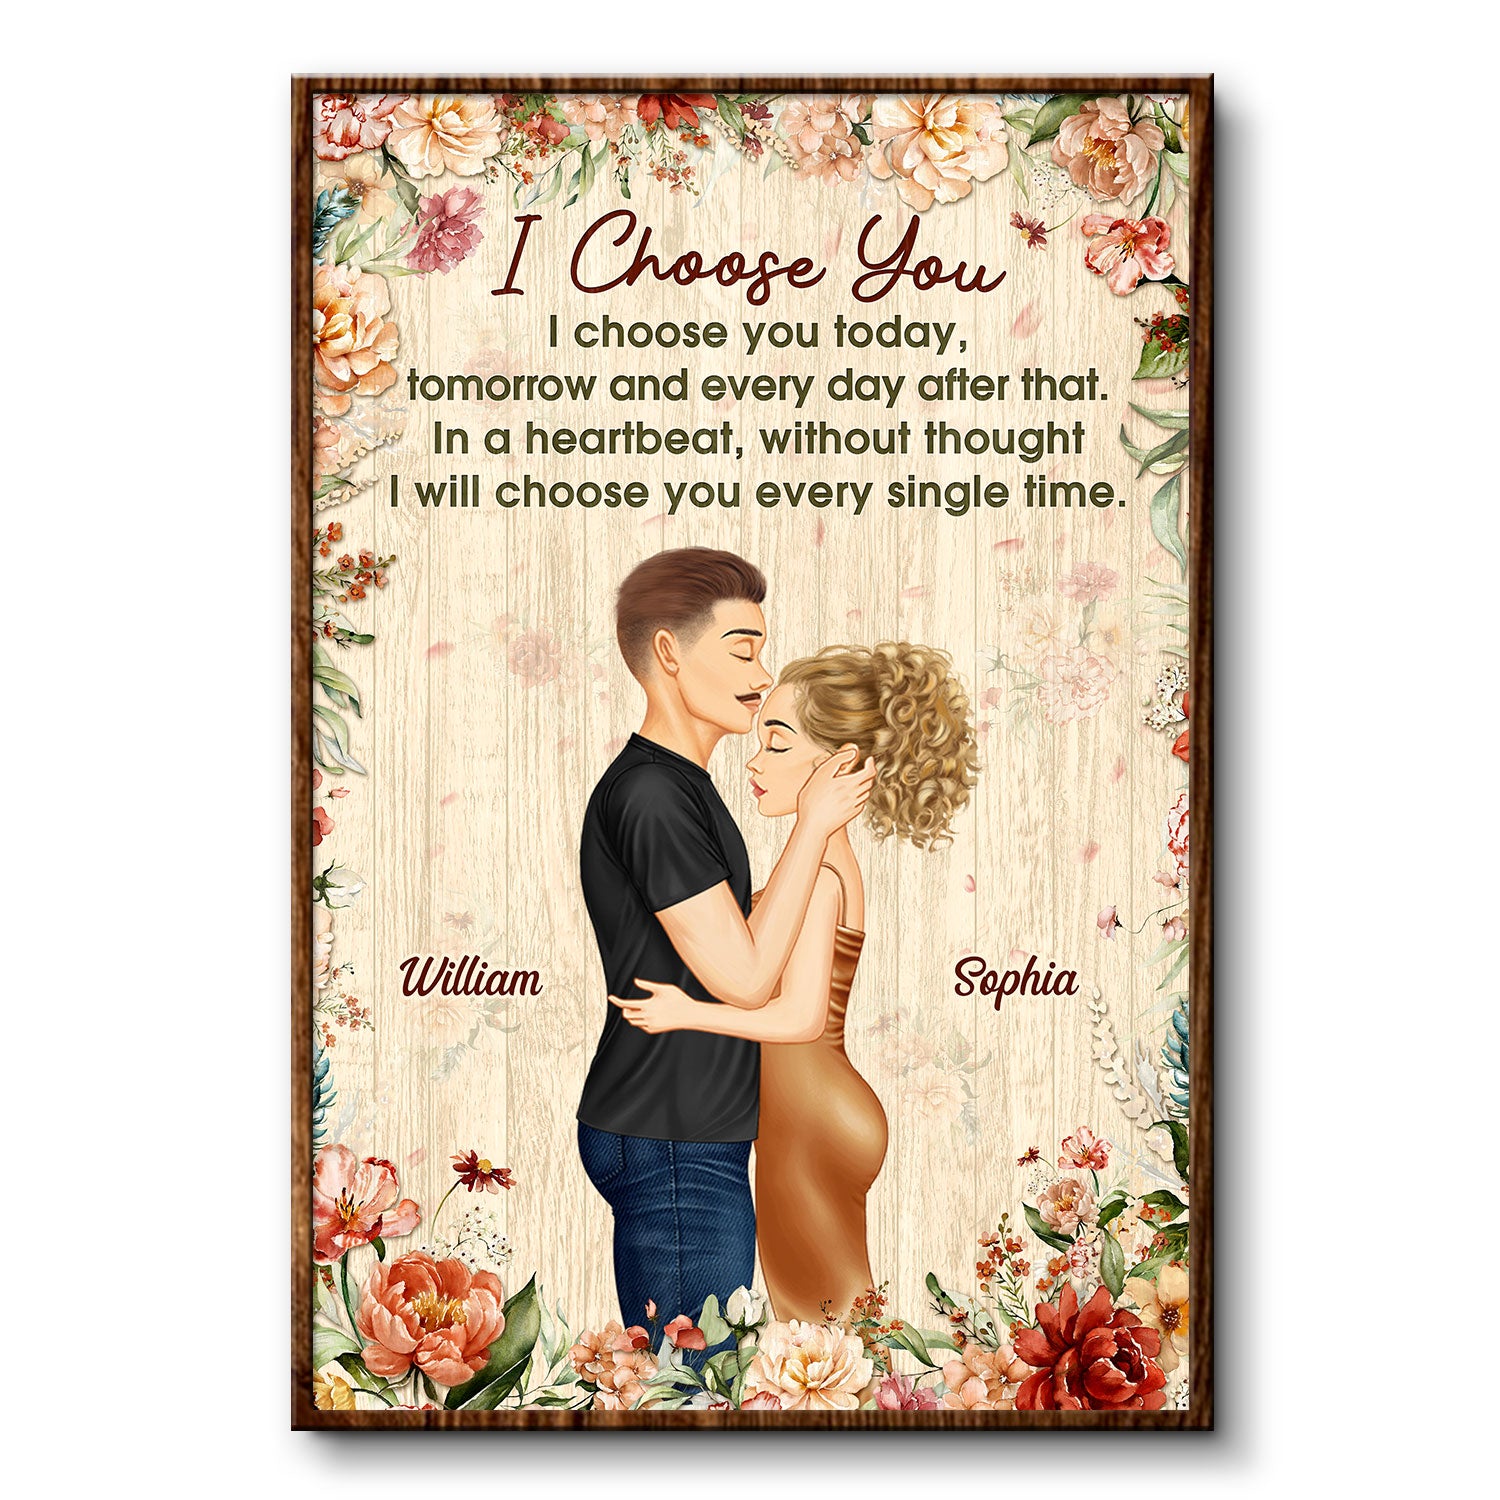 I Will Choose You Every Single Time - Birthday, Anniversary, Loving Gift For Couple, Spouse, Husband, Wife - Personalized Poster